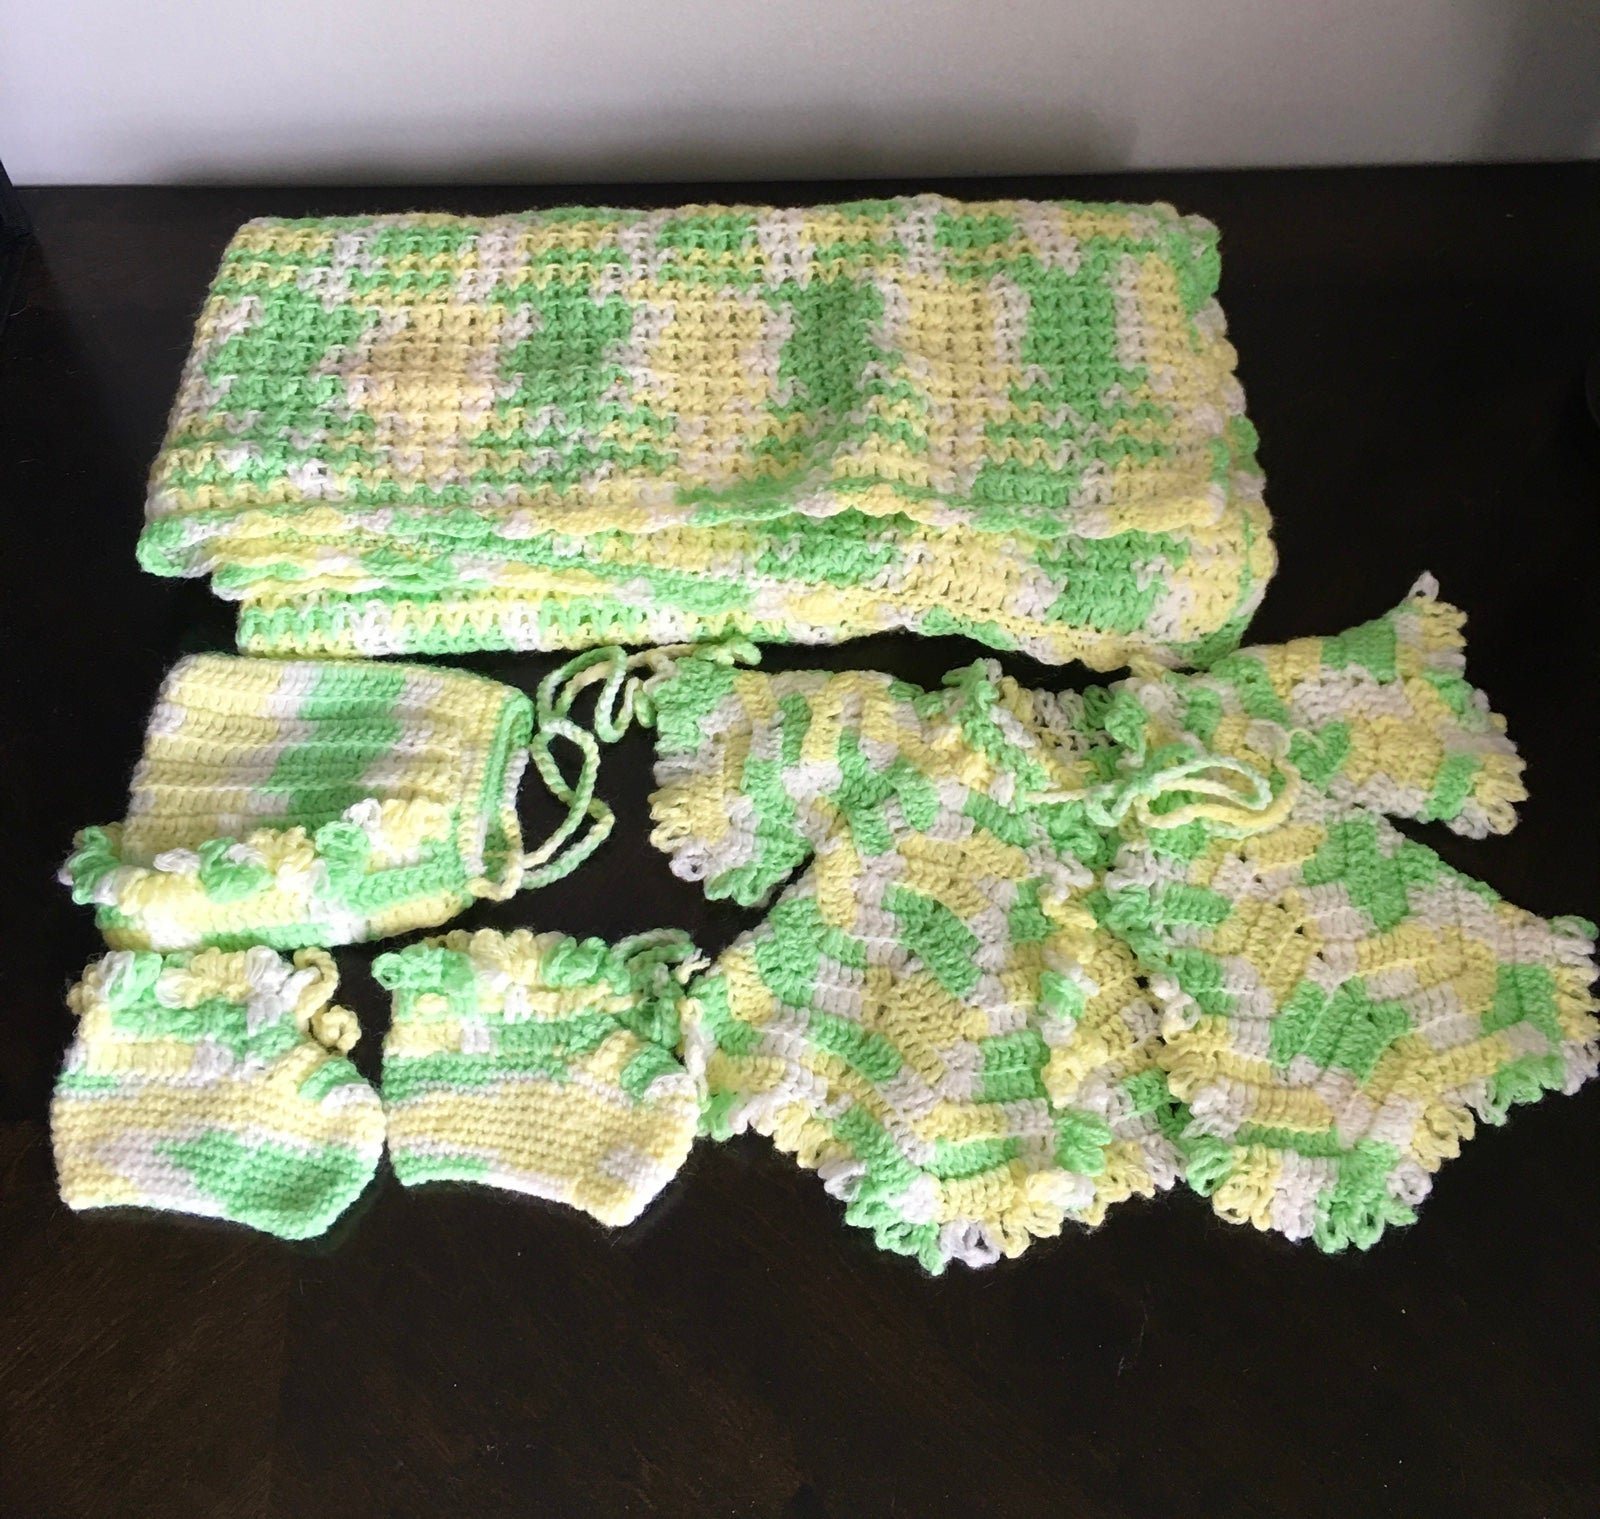 5PC VTG Handmade Green, Yellow & White Knitted Baby Blanket, Booties, Hat & Shaw 9Y5QBQ5iO